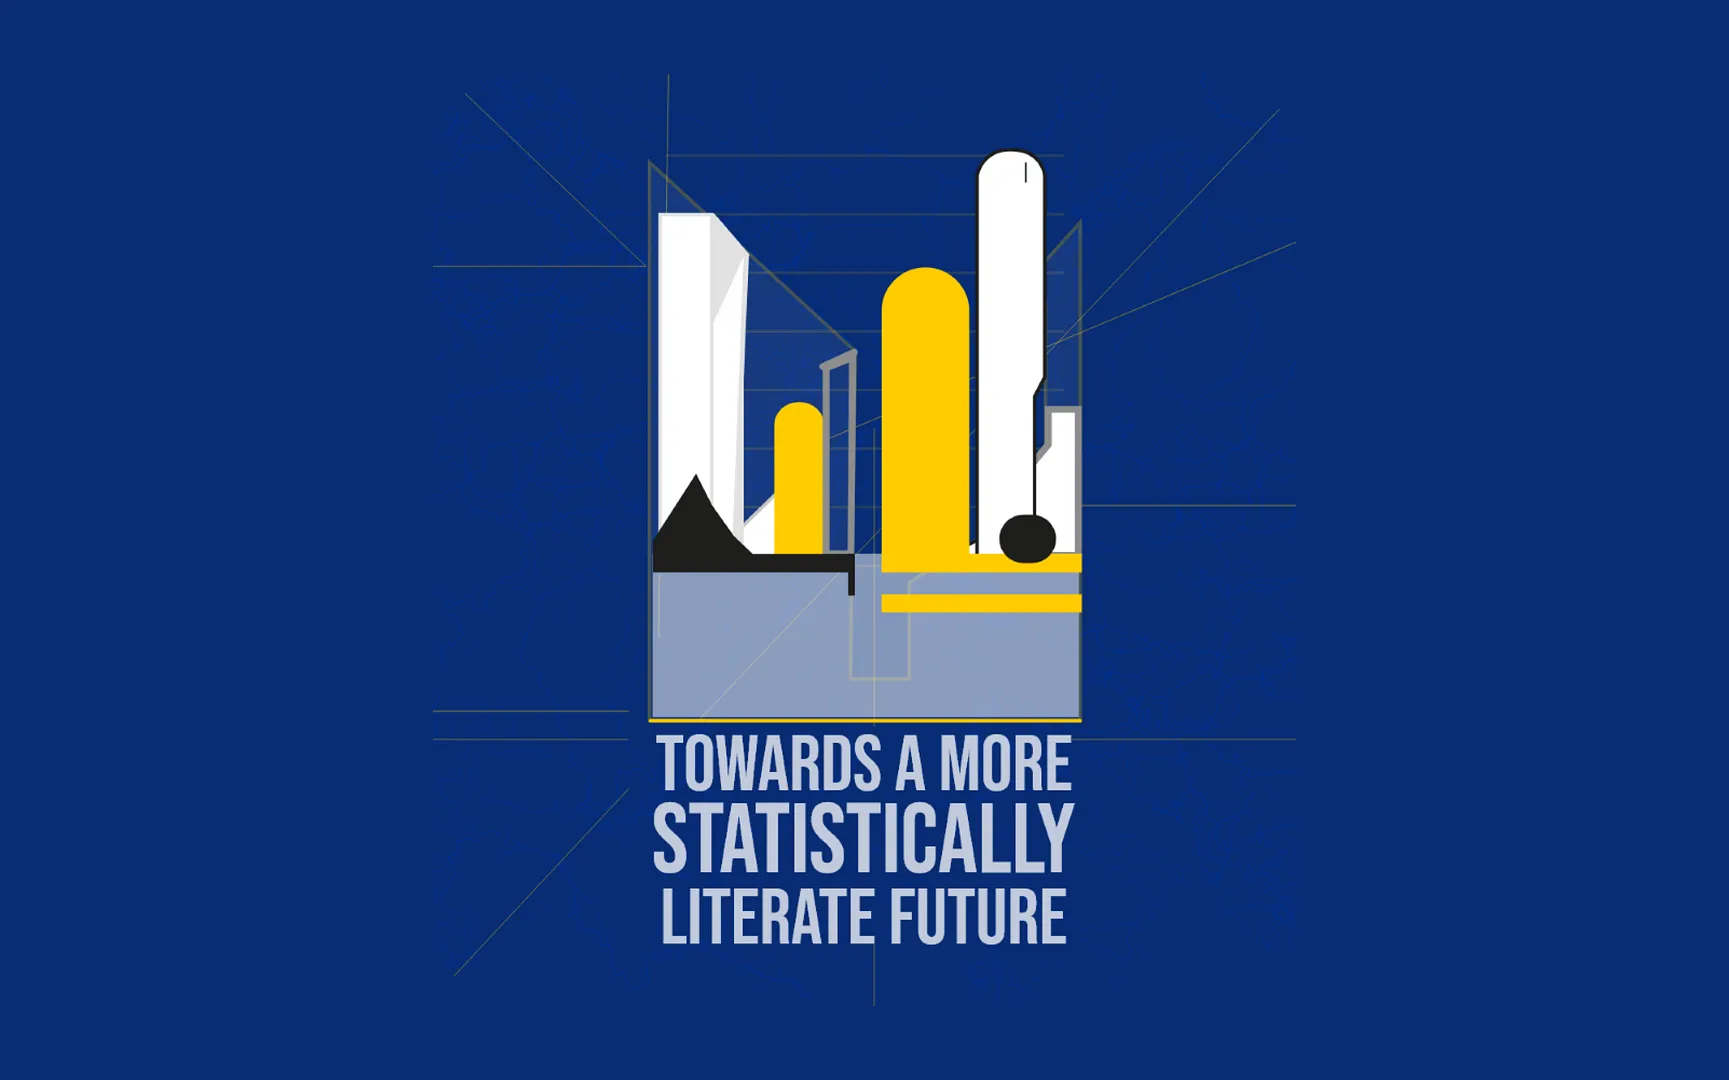 We present at the Conference 'Towards a More Statistically Literate Future'